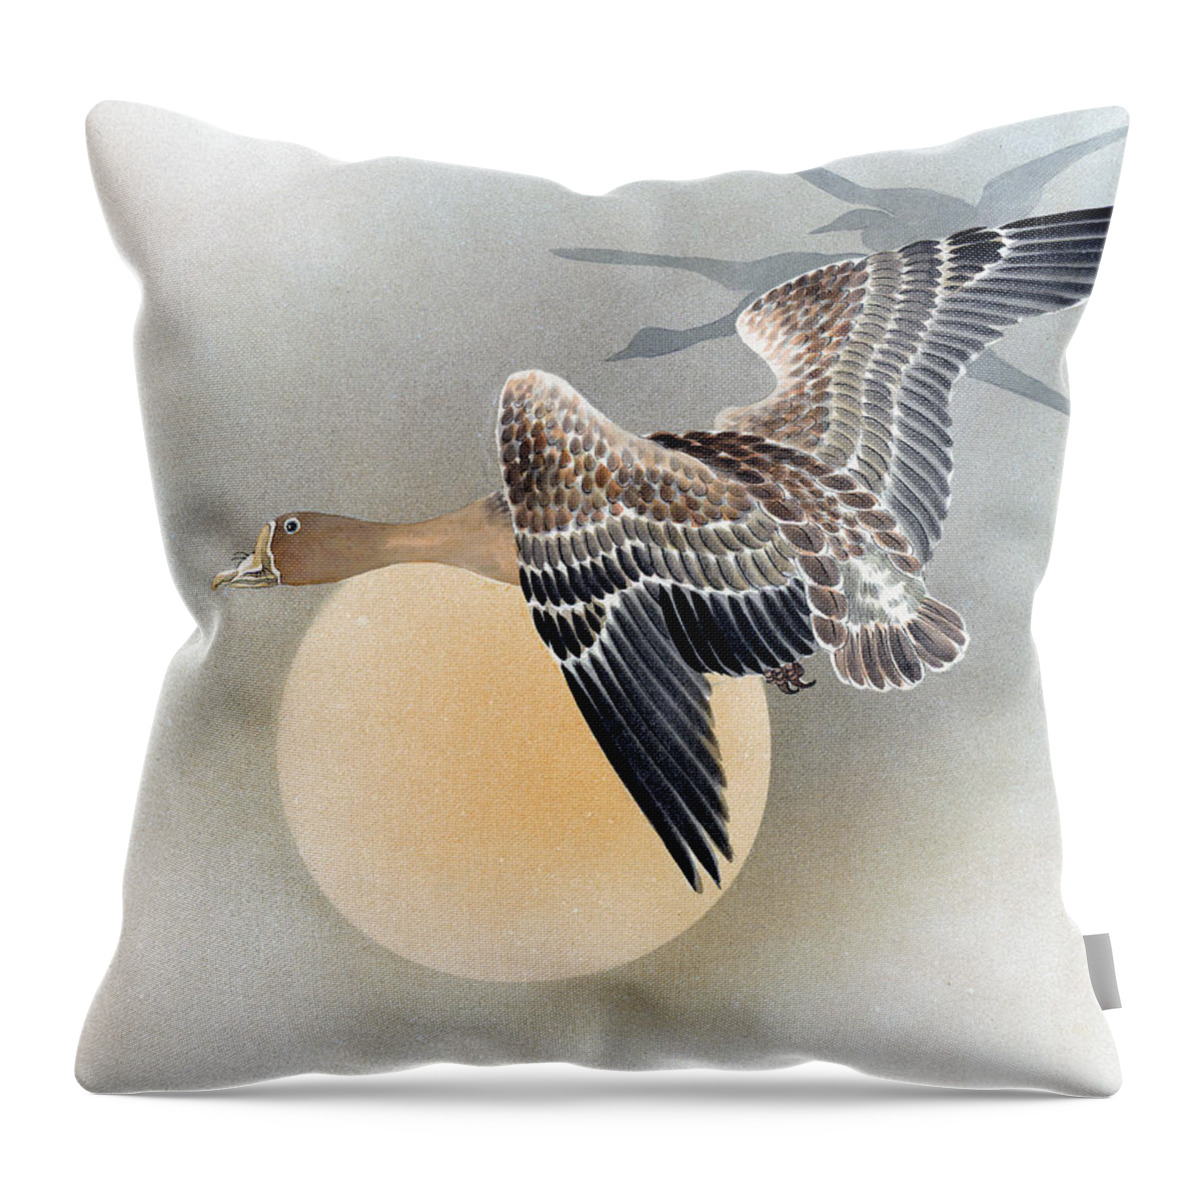 Shuko Throw Pillow featuring the painting Wild Geese by Shuko